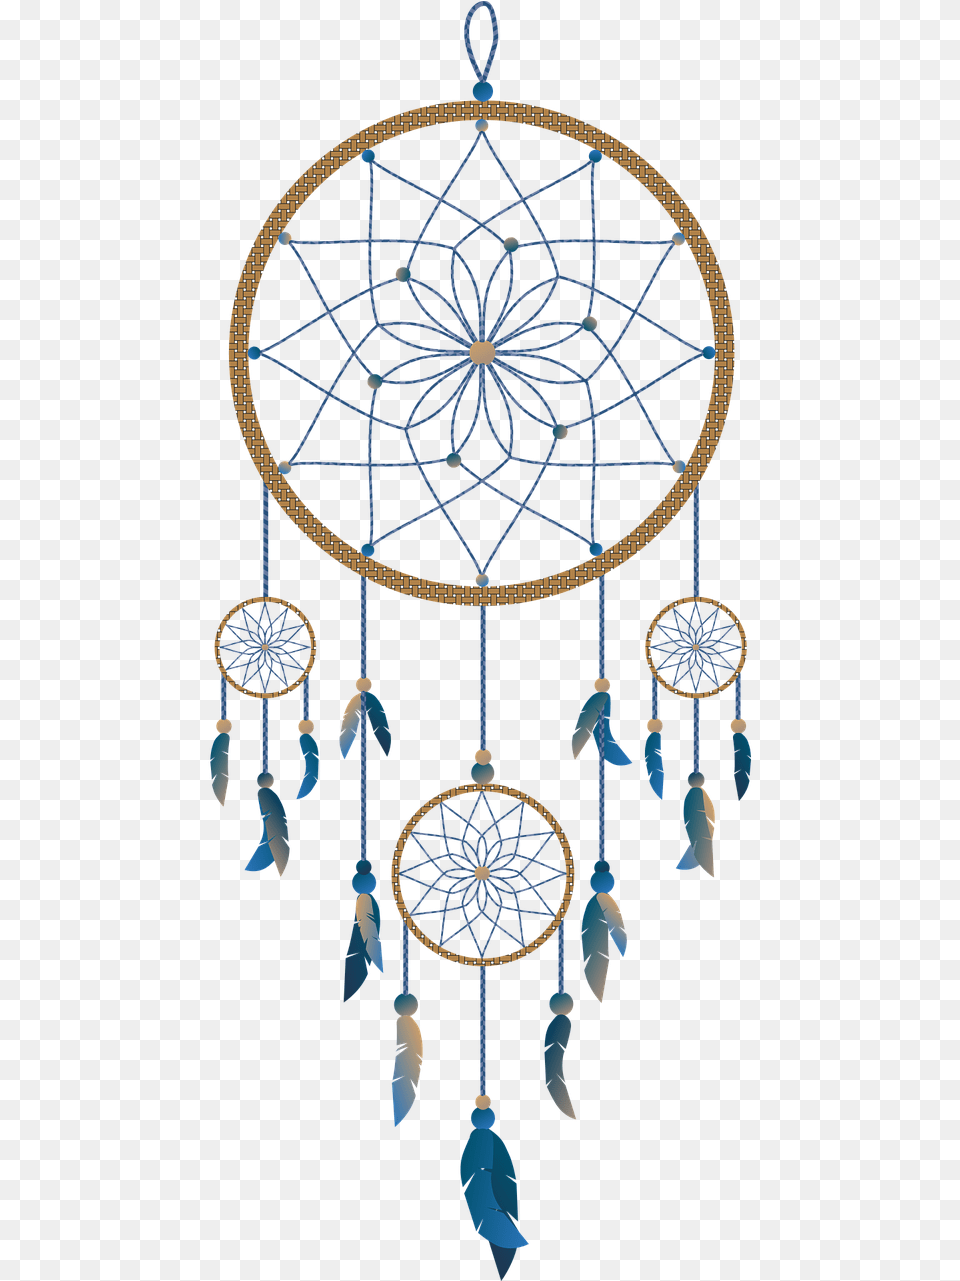 Come Learn About The History Of Dream Catchers With Dreamcatcher Wedding Invites, Accessories, Earring, Jewelry, Chandelier Png